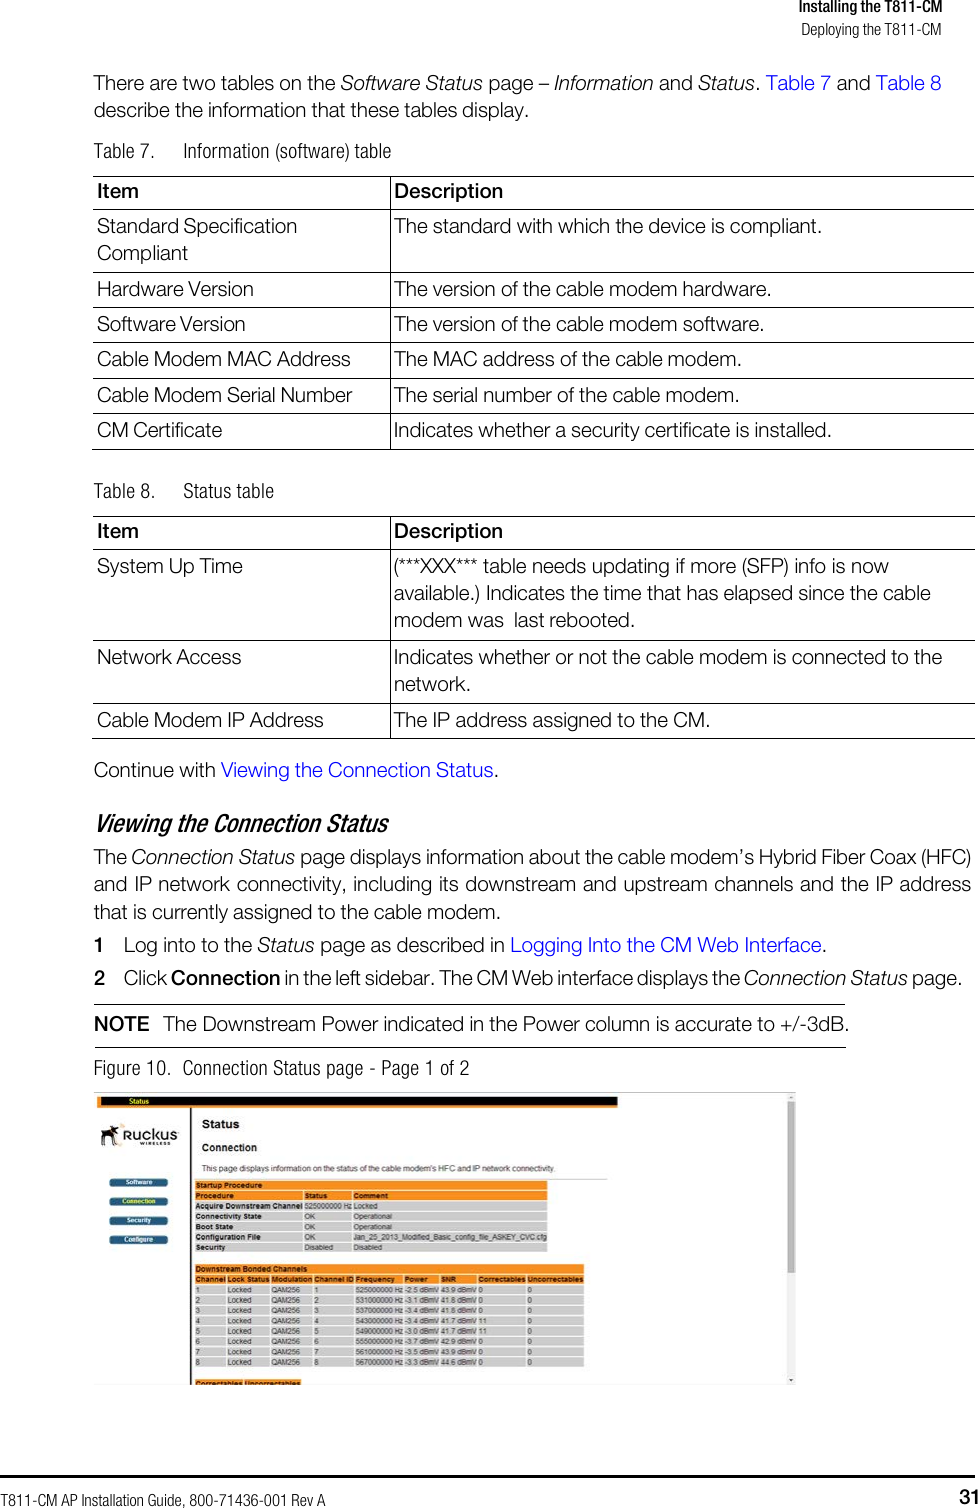 T811-CM AP Installation Guide, 800-71436-001 Rev A 31 Installing the T811-CM Deploying the T811-CM      There are two tables on the Software Status page – Information and Status. Table 7 and Table 8 describe the information that these tables display. Table 7. Information (software) table  Item Description Standard Specification Compliant The standard with which the device is compliant. Hardware Version The version of the cable modem hardware. Software Version The version of the cable modem software. Cable Modem MAC Address The MAC address of the cable modem. Cable Modem Serial Number The serial number of the cable modem. CM Certificate Indicates whether a security certificate is installed.  Table 8. Status table  Item Description System Up Time (***XXX*** table needs updating if more (SFP) info is now available.) Indicates the time that has elapsed since the cable modem was last rebooted. Network Access Indicates whether or not the cable modem is connected to the network. Cable Modem IP Address The IP address assigned to the CM.  Continue with Viewing the Connection Status.  Viewing the Connection Status The Connection Status page displays information about the cable modem’s Hybrid Fiber Coax (HFC) and IP network connectivity, including its downstream and upstream channels and the IP address that is currently assigned to the cable modem. 1 Log into to the Status page as described in Logging Into the CM Web Interface. 2 Click Connection in the left sidebar. The CM Web interface displays the Connection Status page.   NOTE  The Downstream Power indicated in the Power column is accurate to +/-3dB.   Figure 10.  Connection Status page - Page 1 of 2   